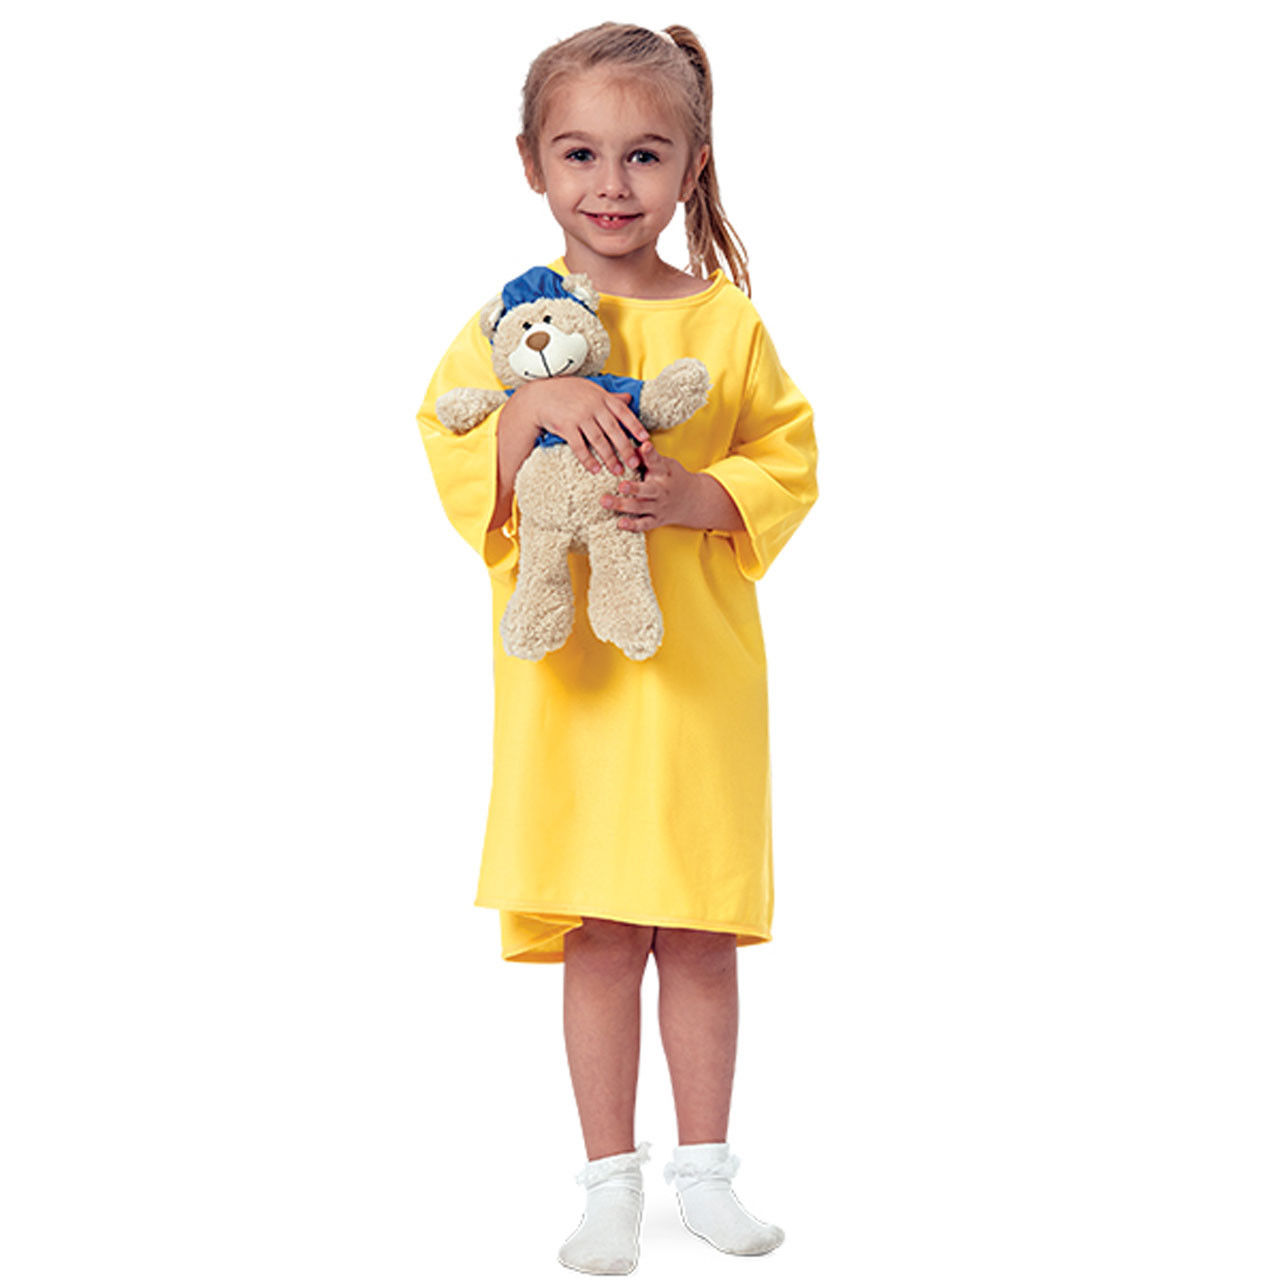 Does the children's hospital gowns feature a specific type of sleeve?